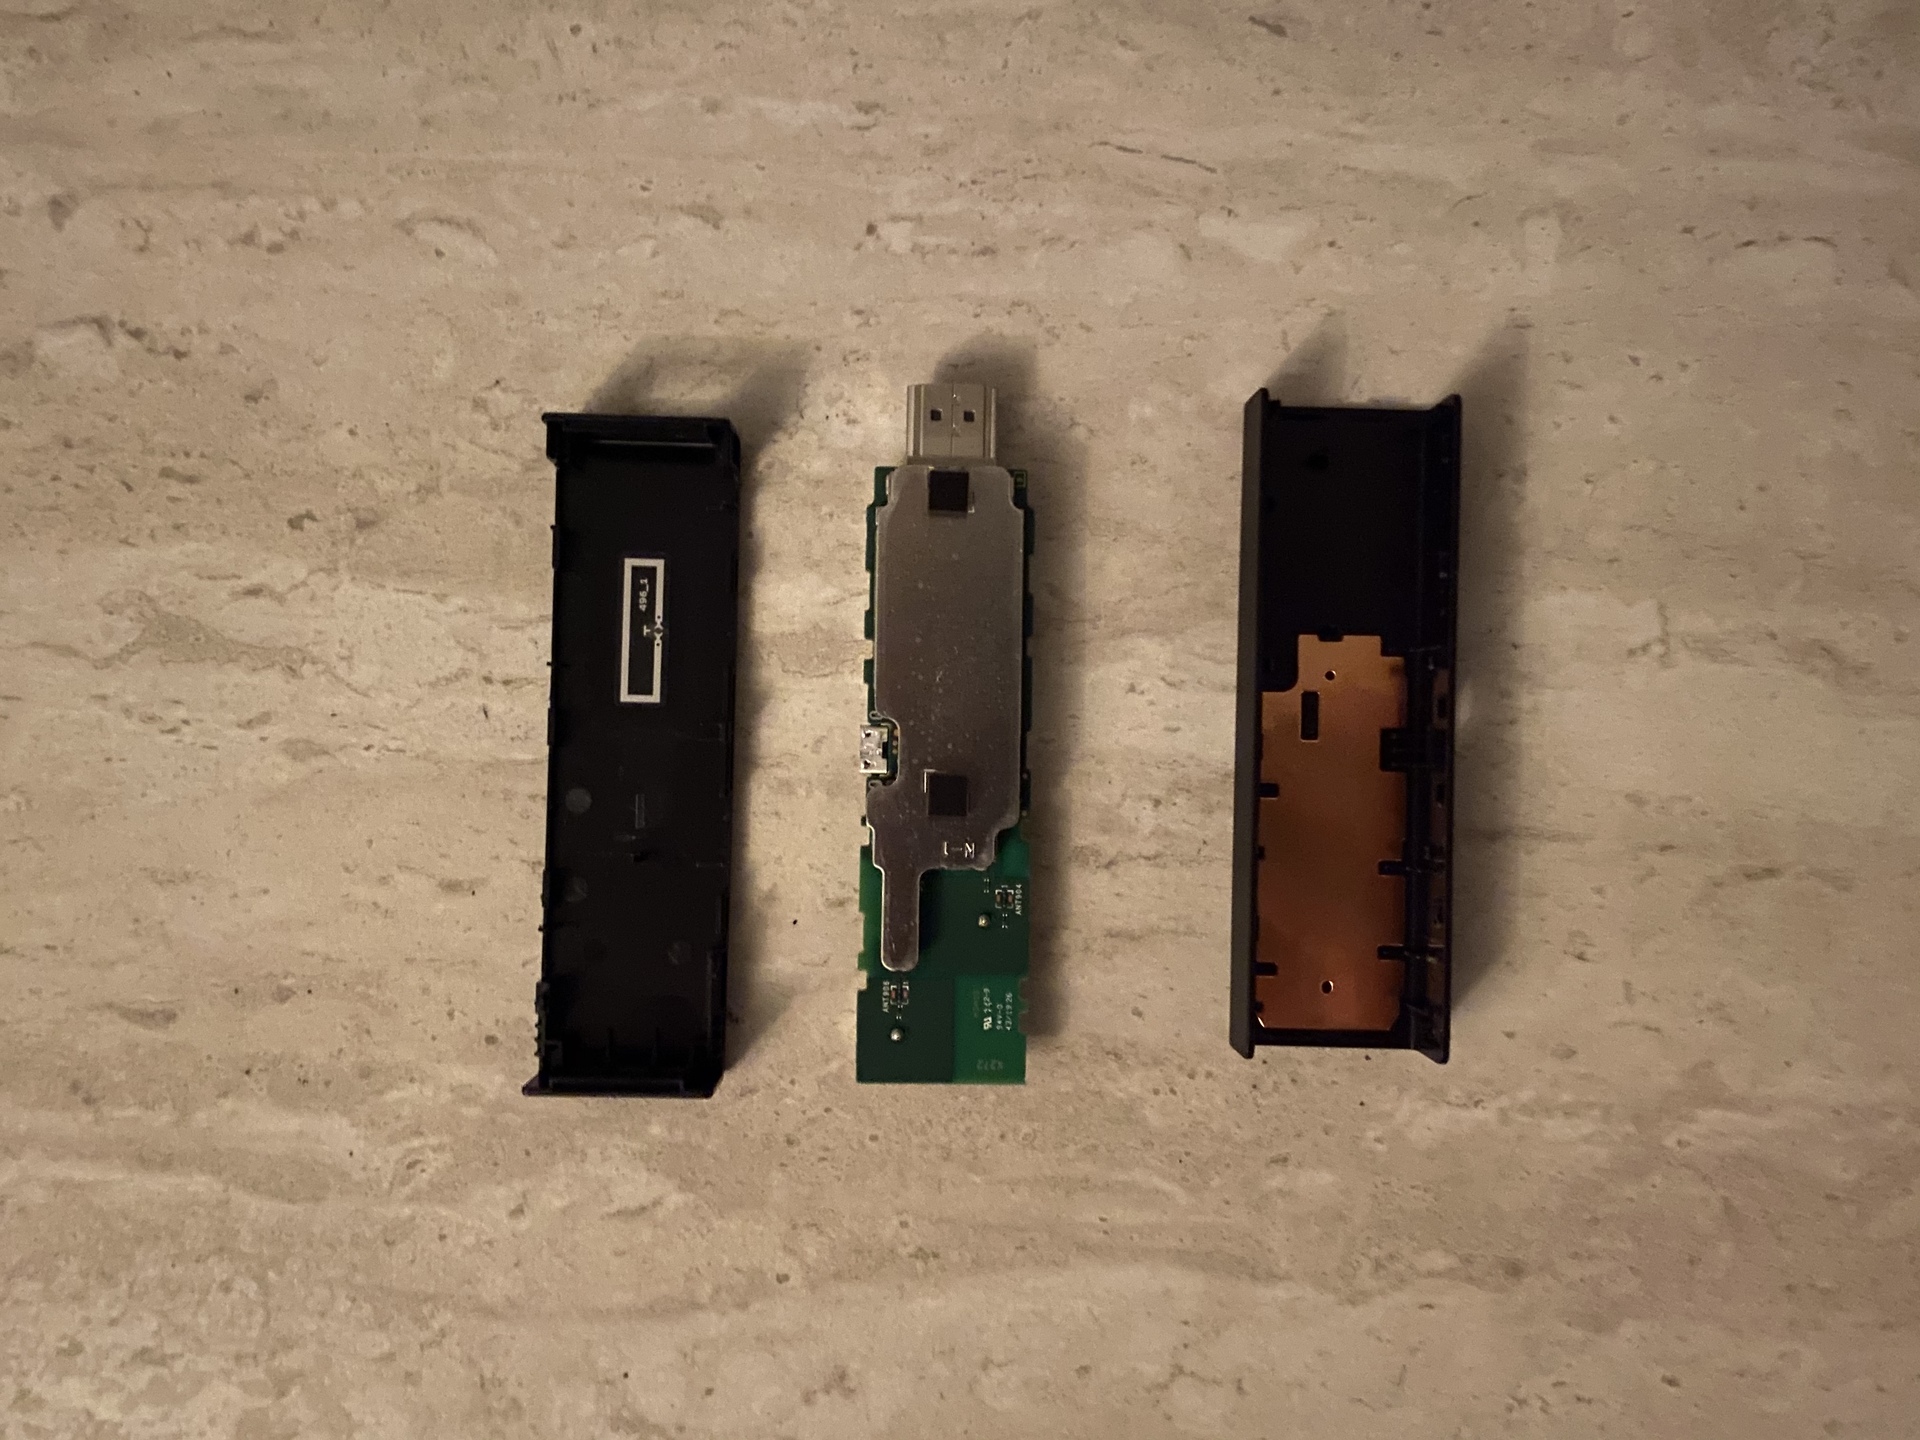 Fire TV Stick casing removed